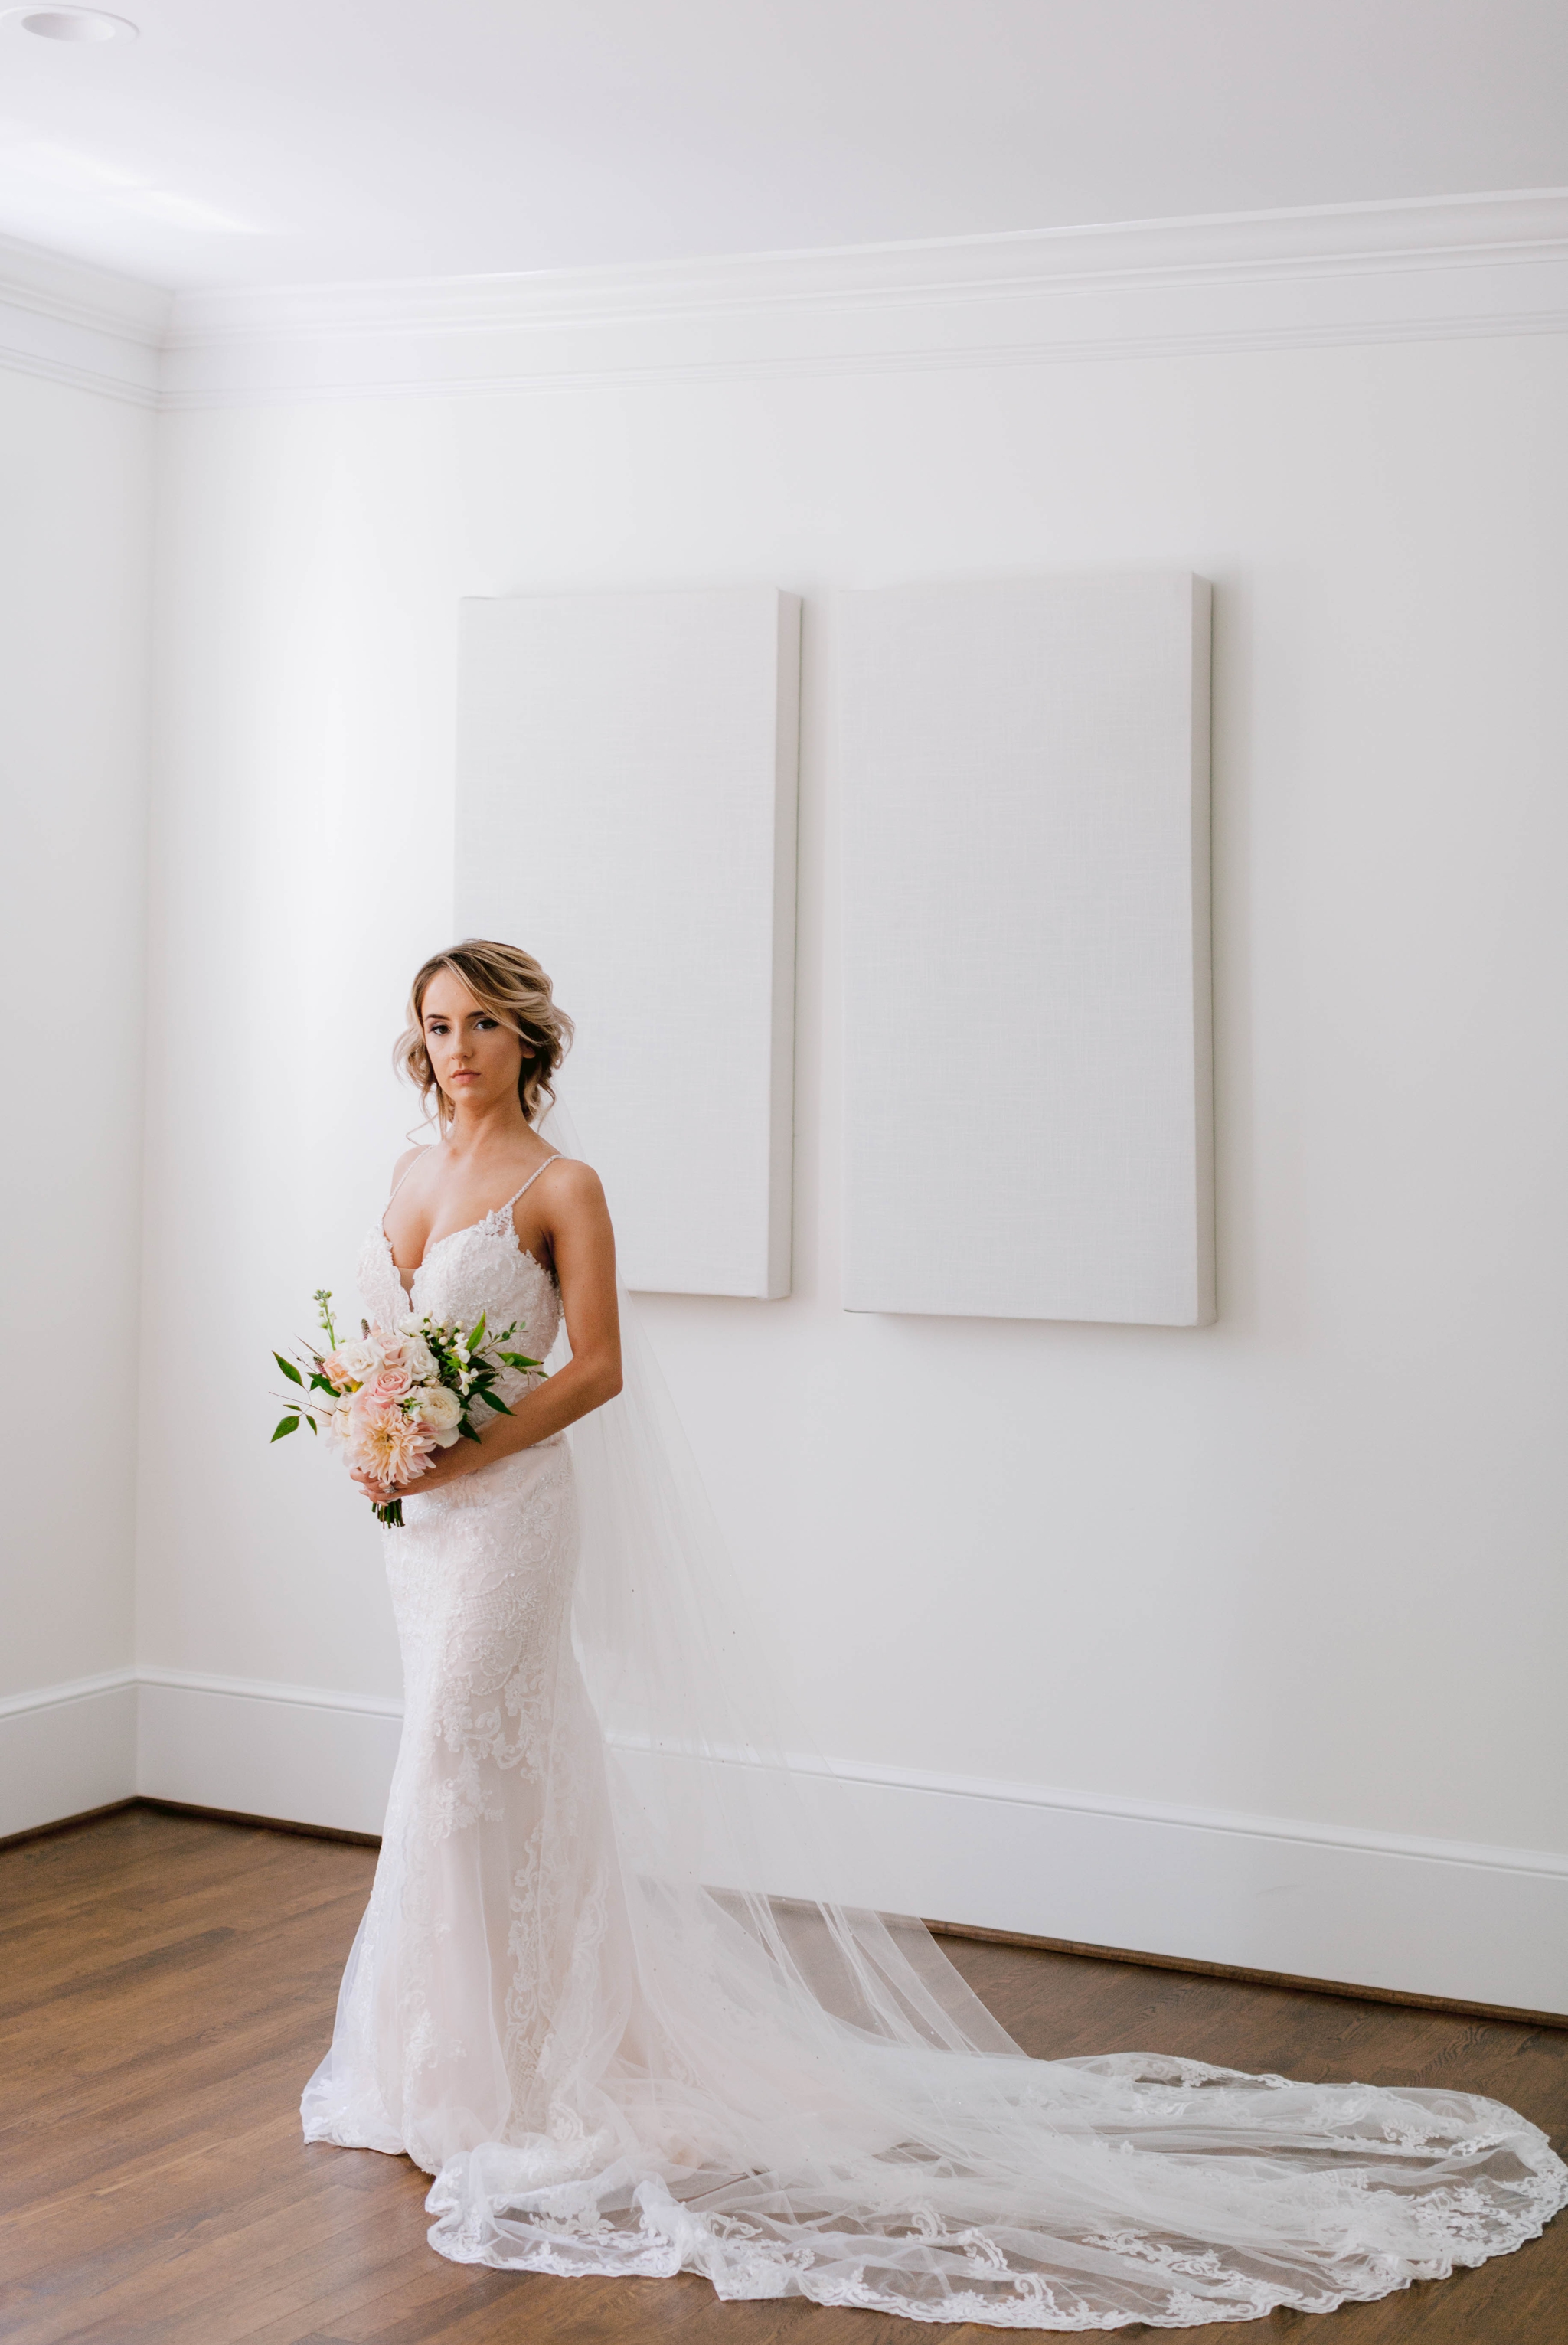  Indoor Natural Light Bridal Portraits by a window with a white backdrop - classic bride with soft drop veil over her face - wedding gown by Stella York - Honolulu, Oahu, Hawaii Wedding Photographer 